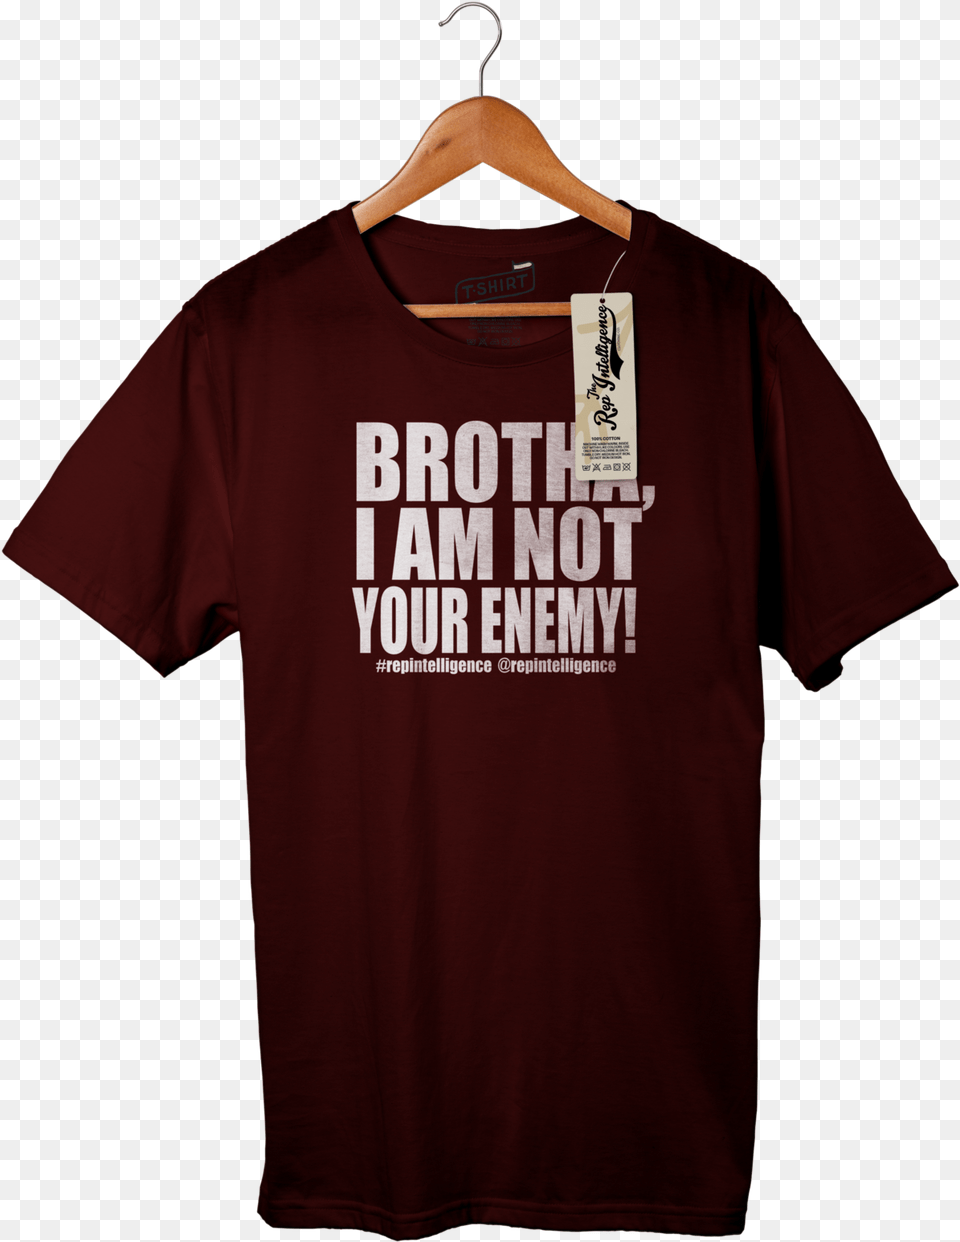 Not Your Enemy In Maroon Clothes Hanger, Clothing, T-shirt, Shirt Png Image